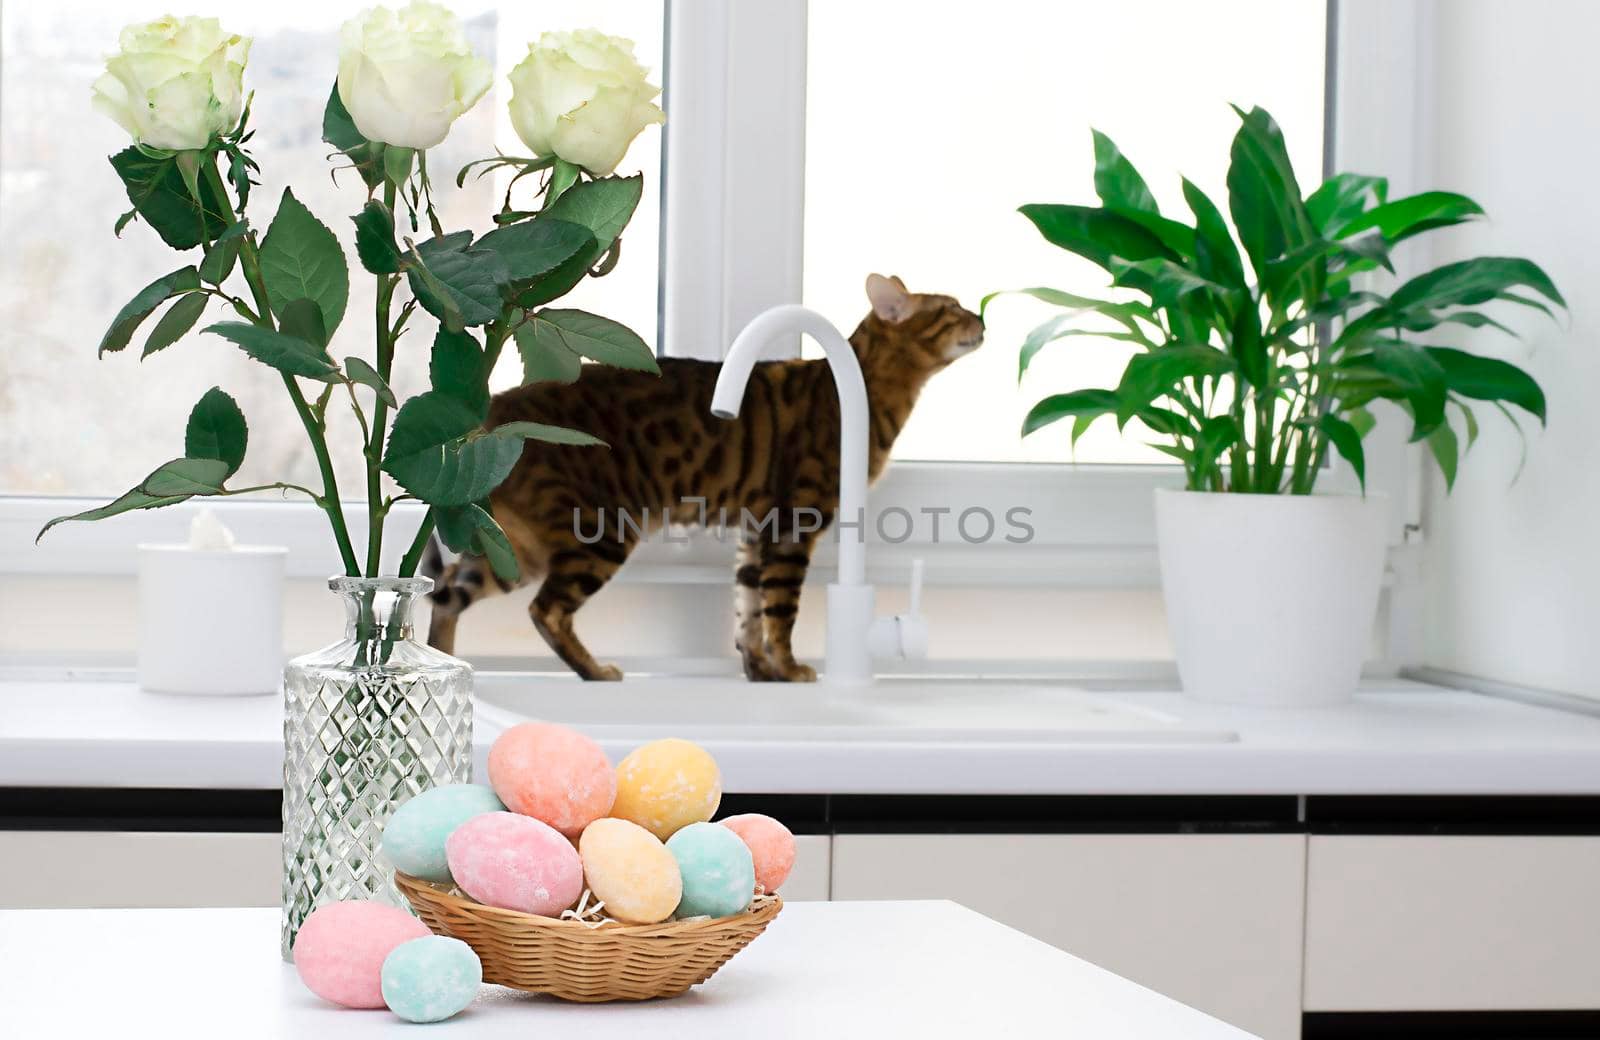 A wicker basket with multi-colored Easter eggs and a vase with white roses against the background of a Bengal cat by the window. Soft focus